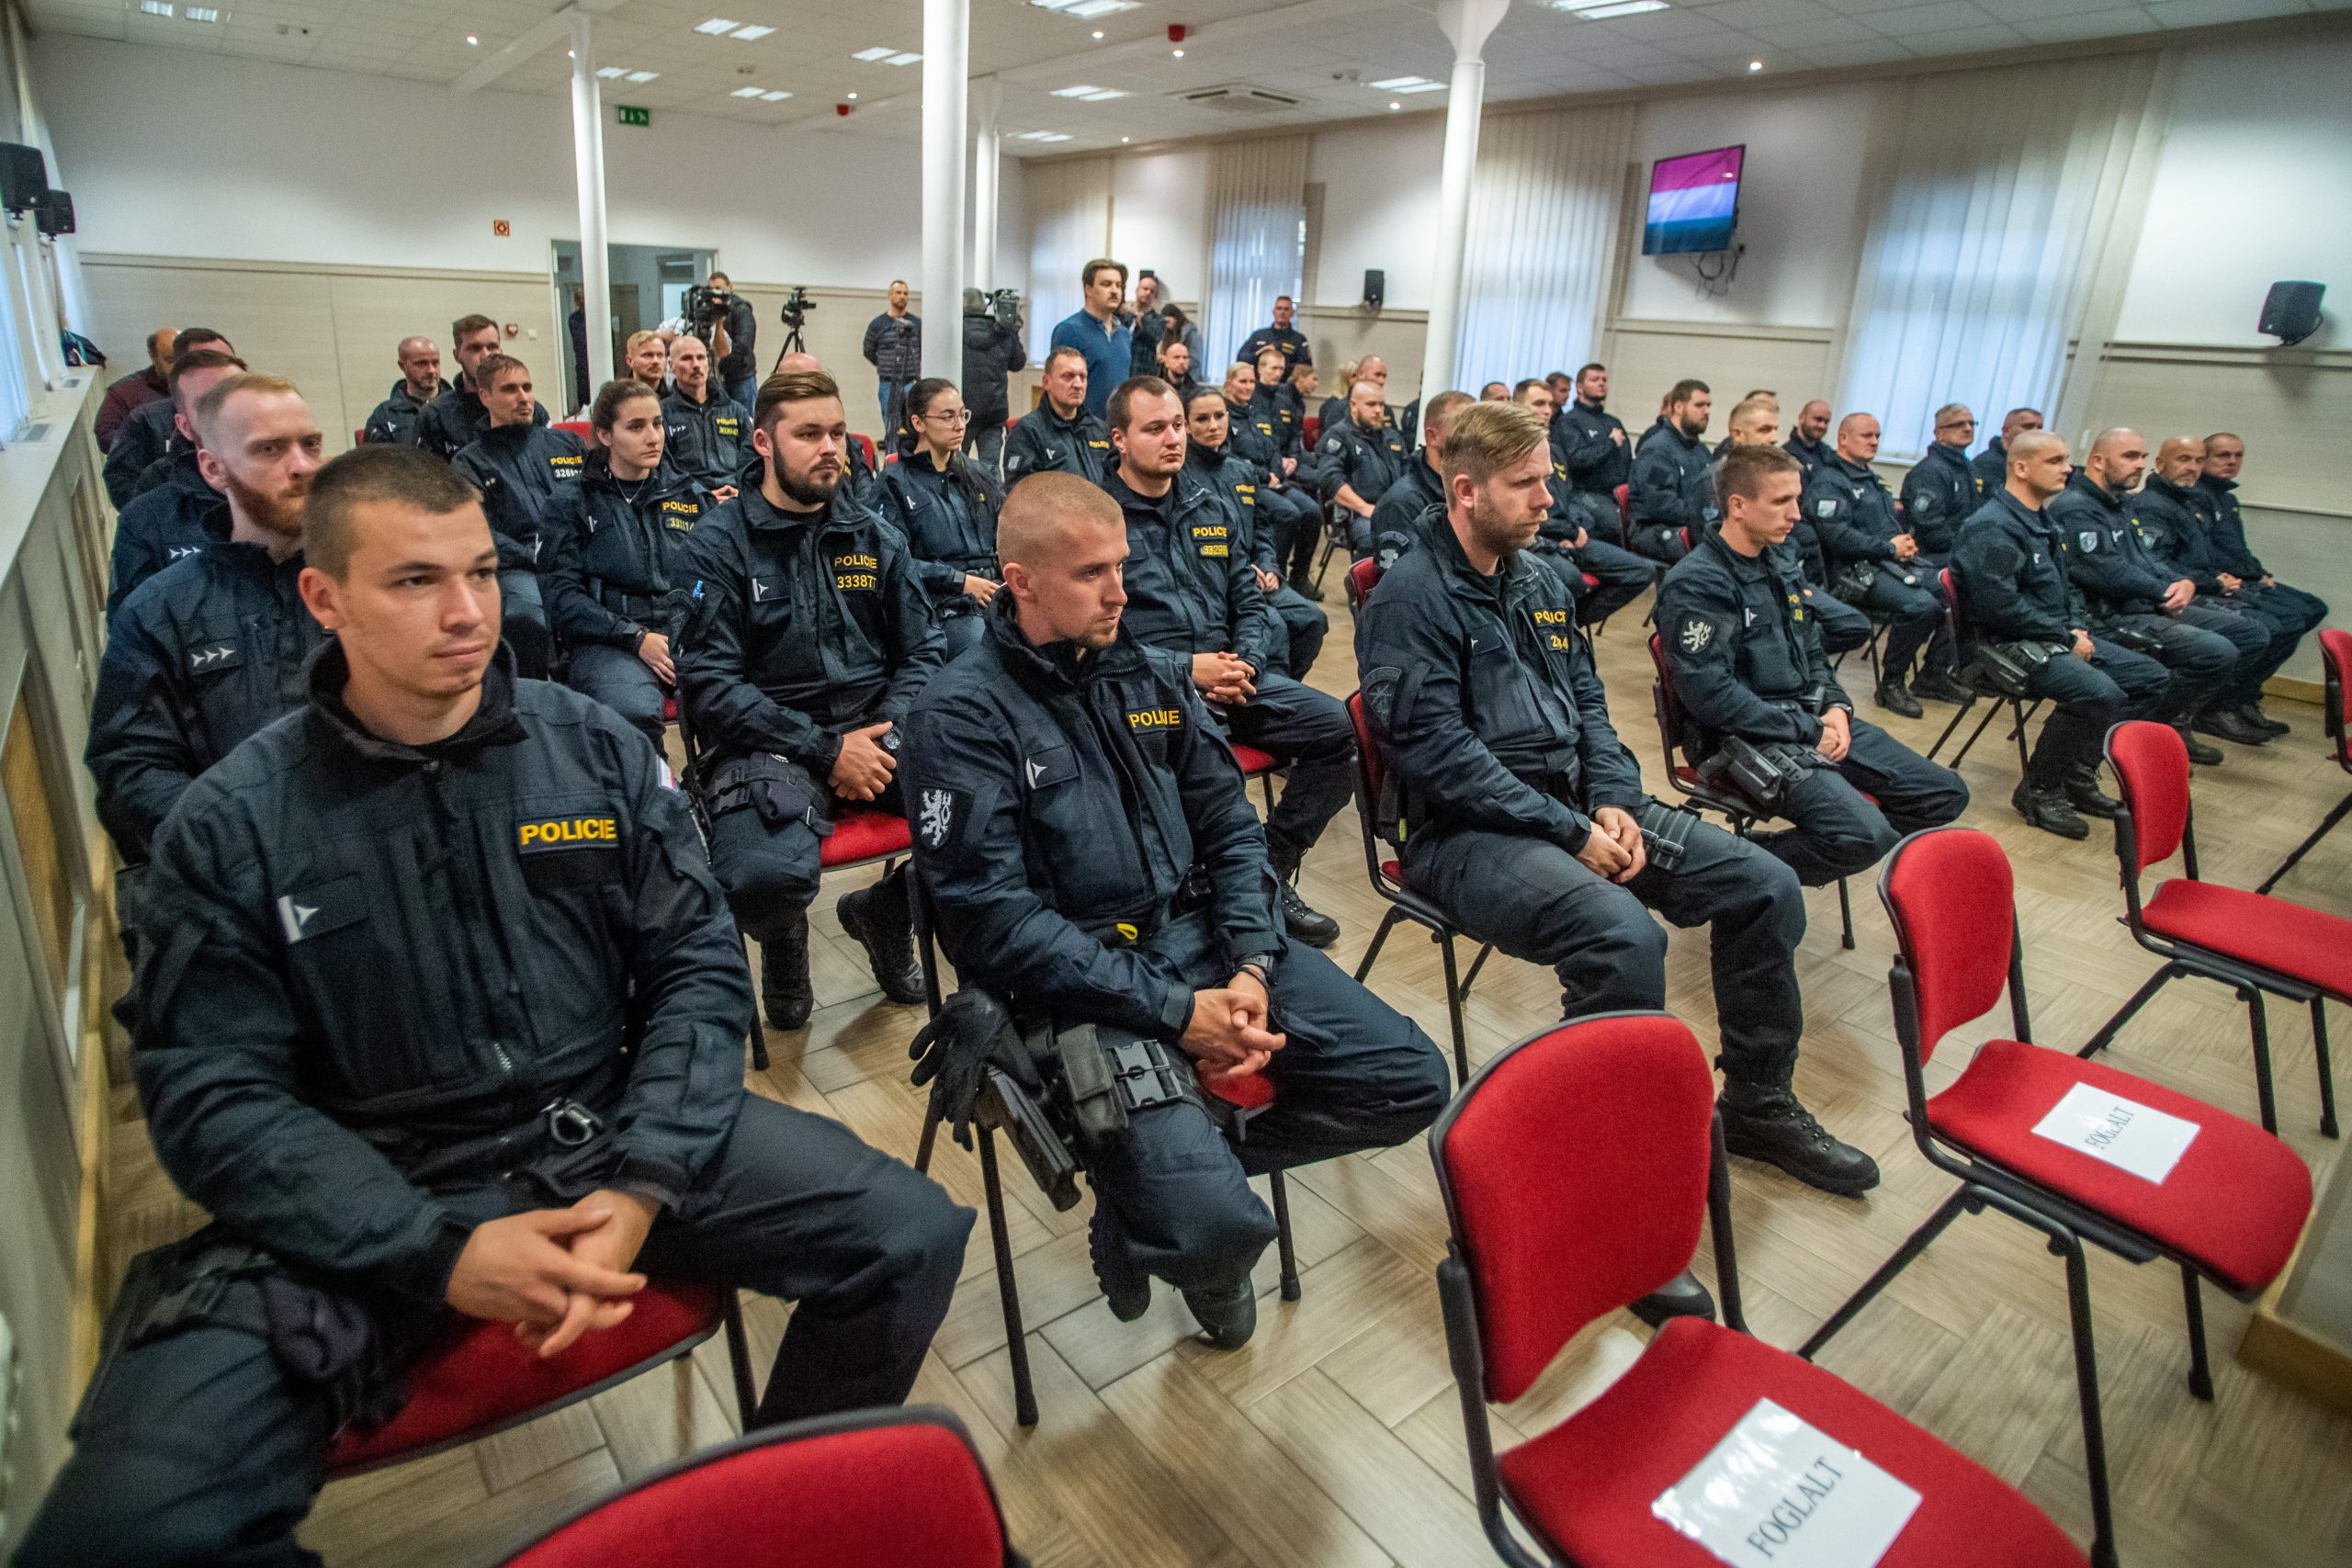 50 Czech Police Officers Arrive to Aid in Protection of Hungary's Border